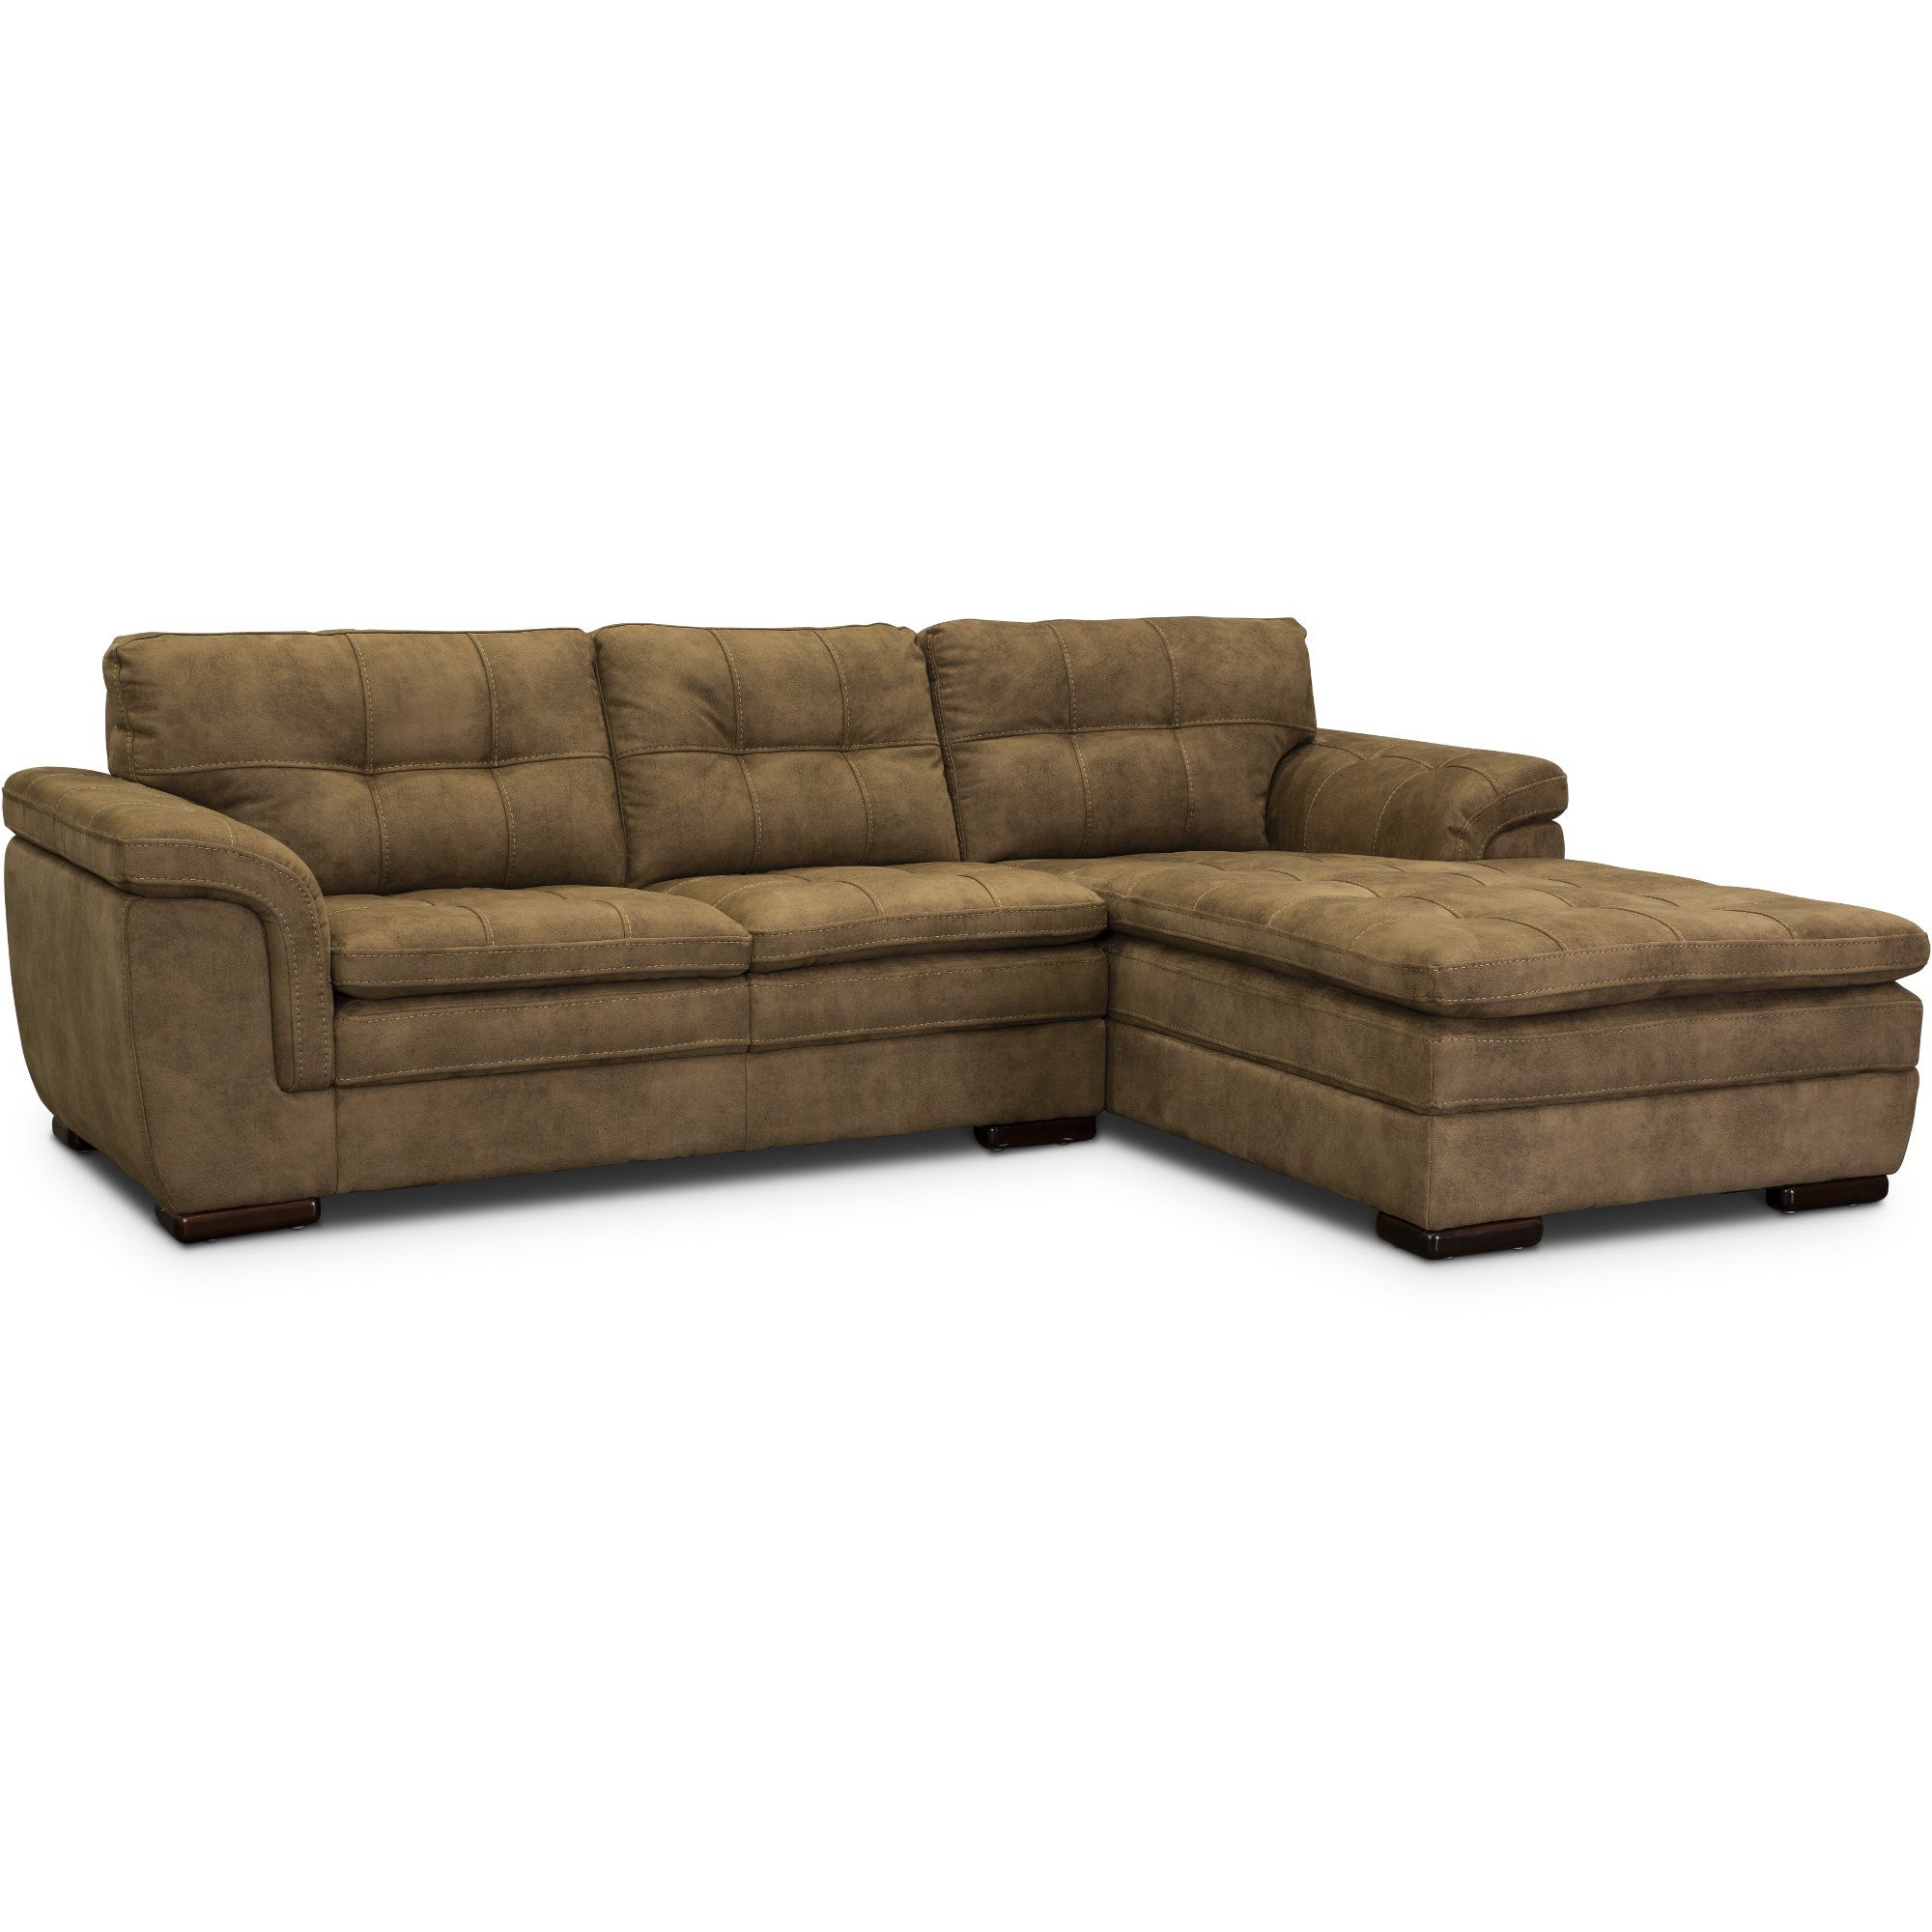 2 Piece Sectional Sofa Chaise – Latest Sofa Pictures Intended For 2pc Maddox Left Arm Facing Sectional Sofas With Chaise Brown (View 9 of 15)